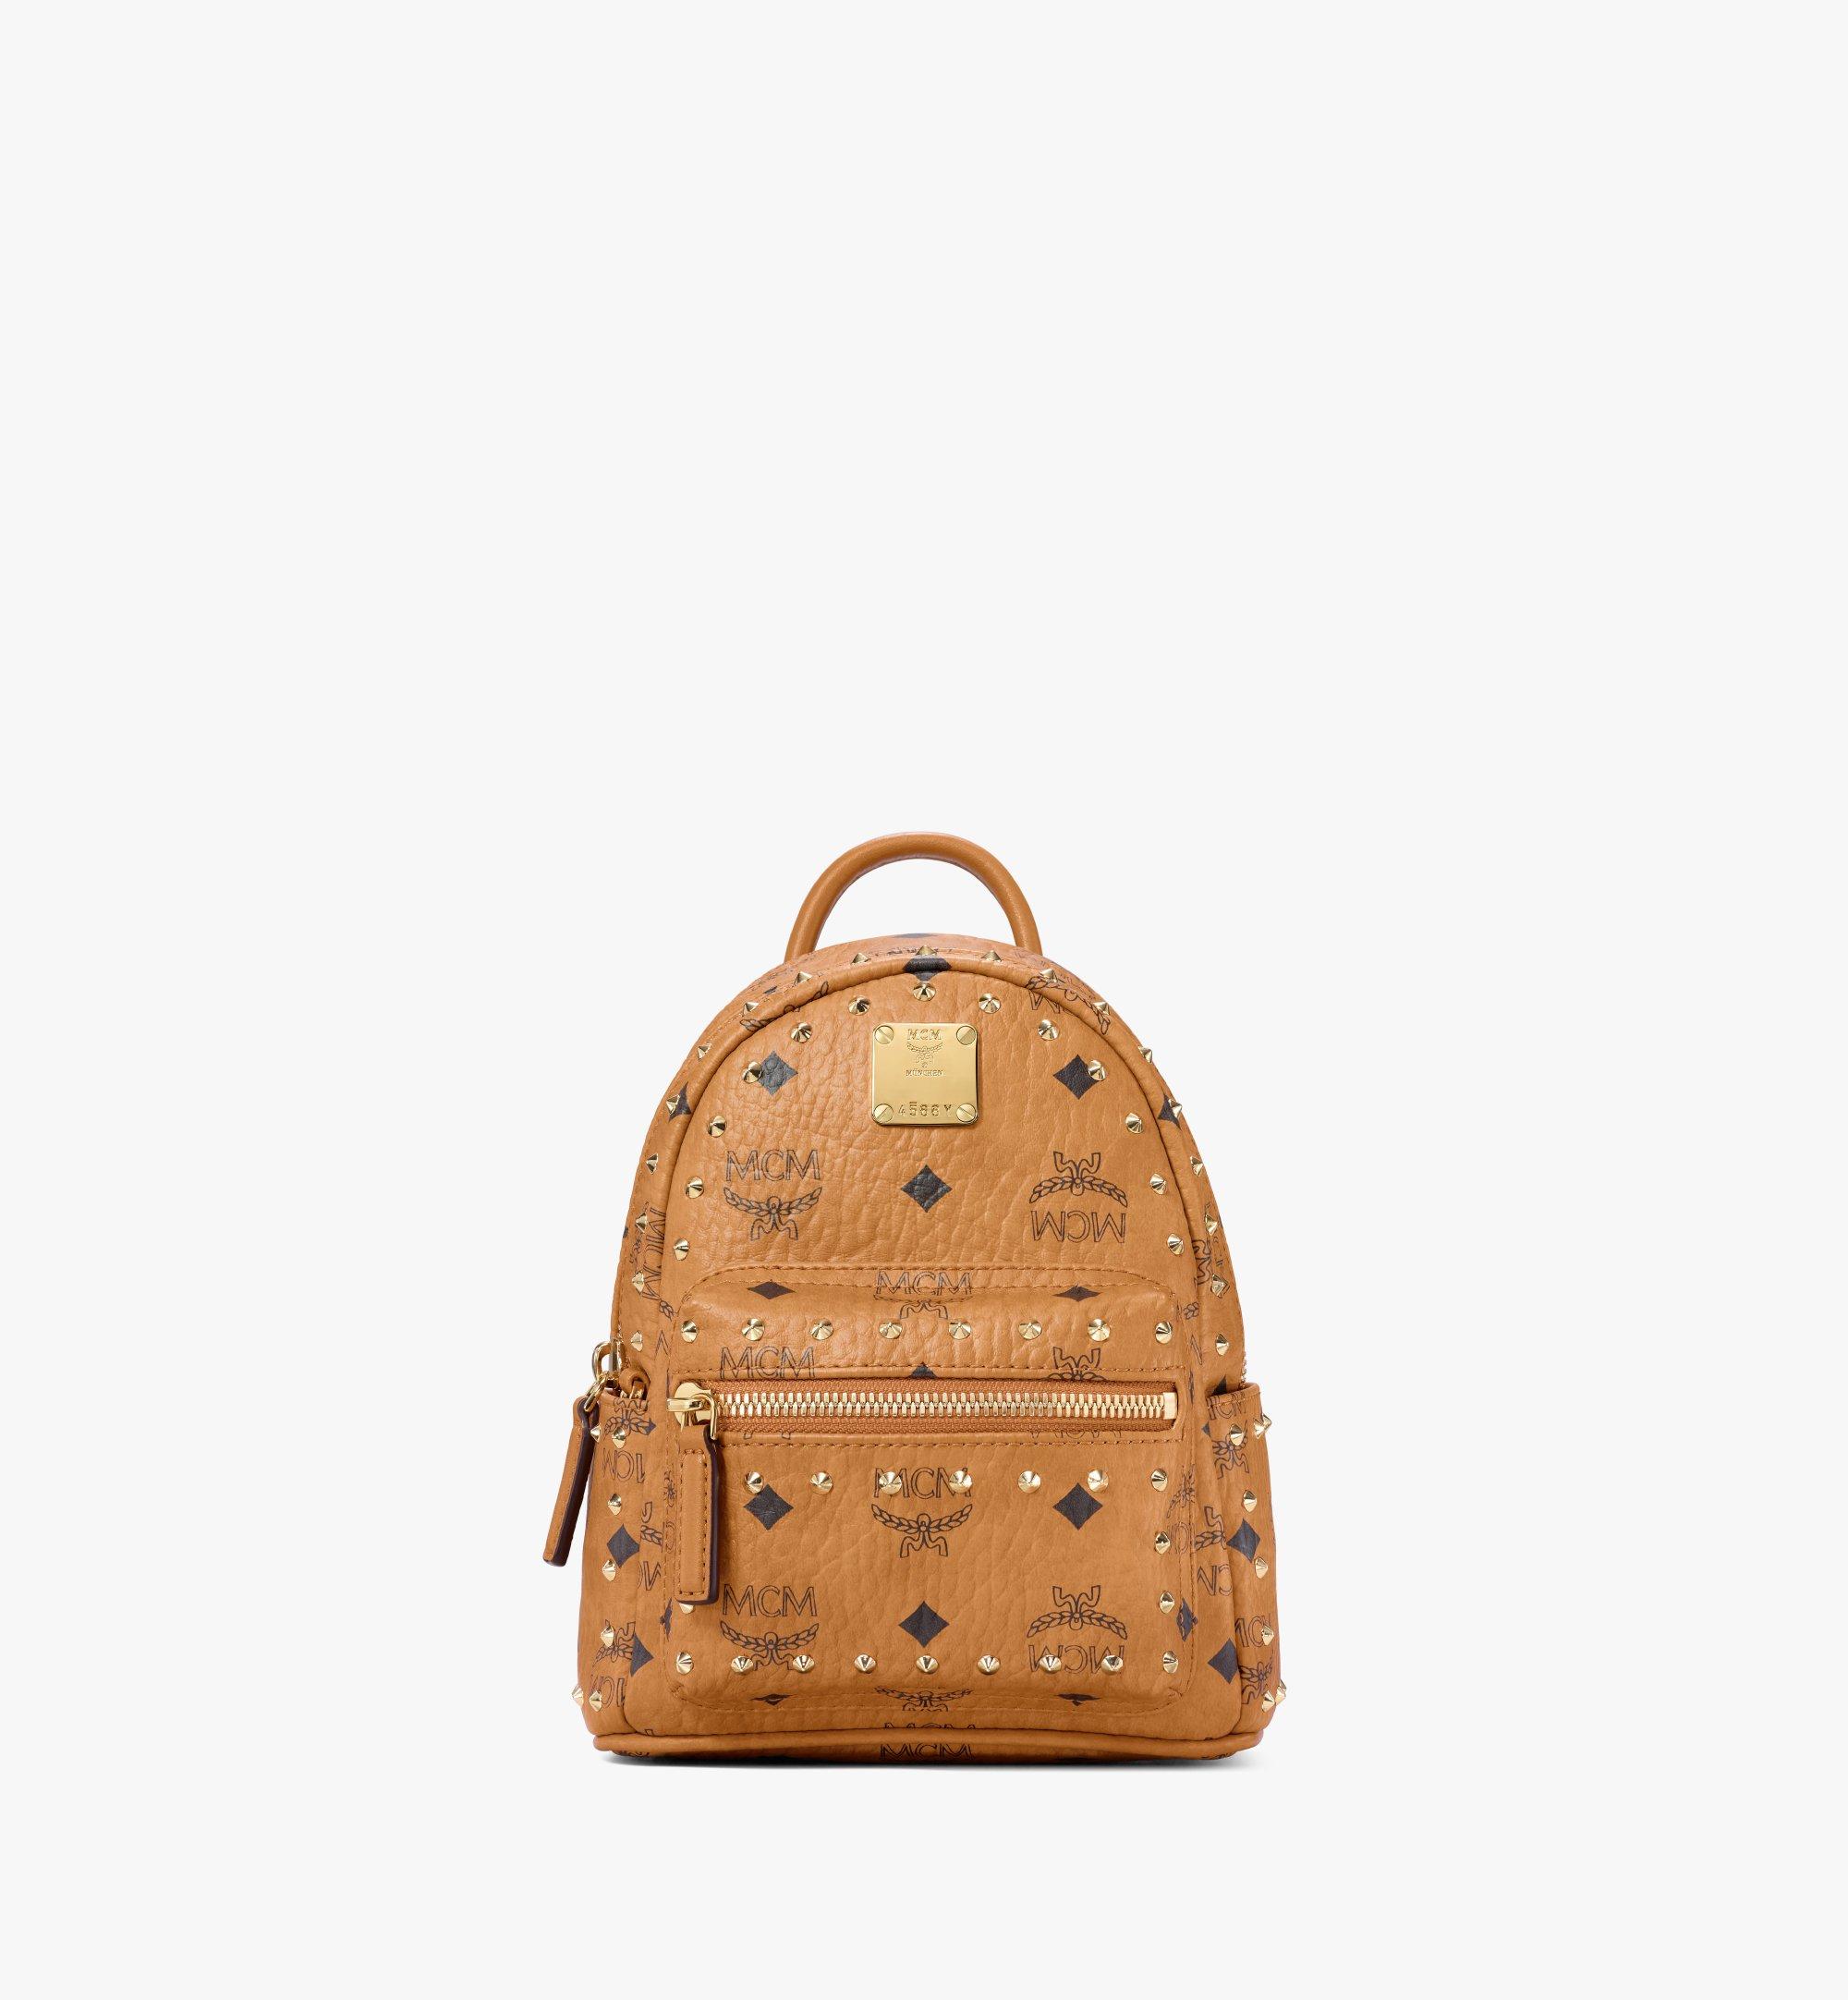 MCM Stark Bebe Boo Backpack in Studded Outline Visetos Cognac MMKAAVE05CO001 Alternate View 1